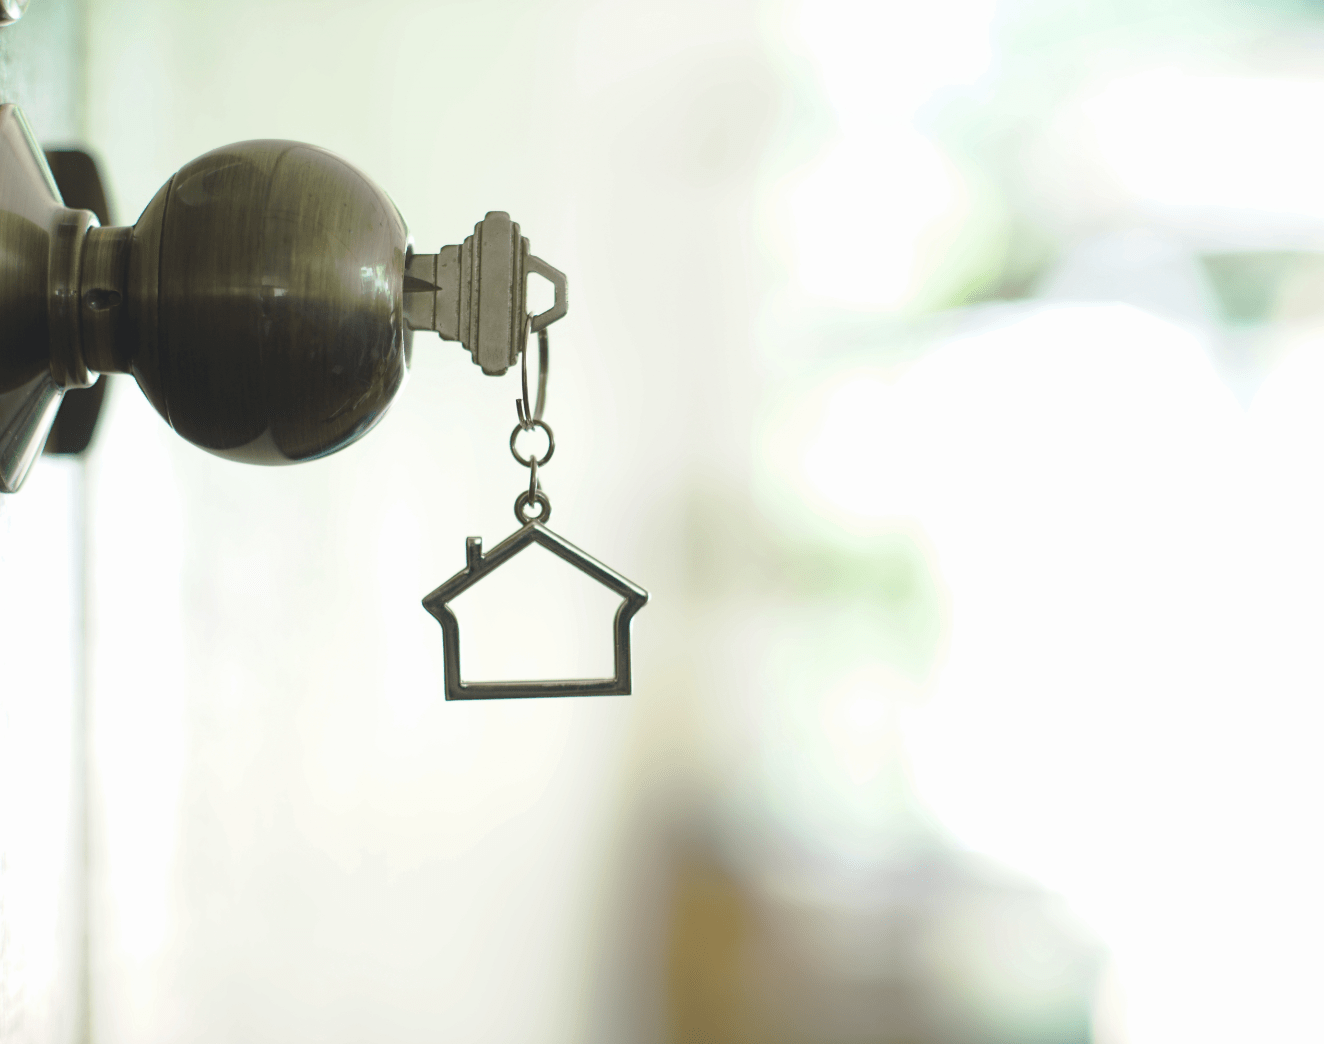 House keychain hanging from a key in the door